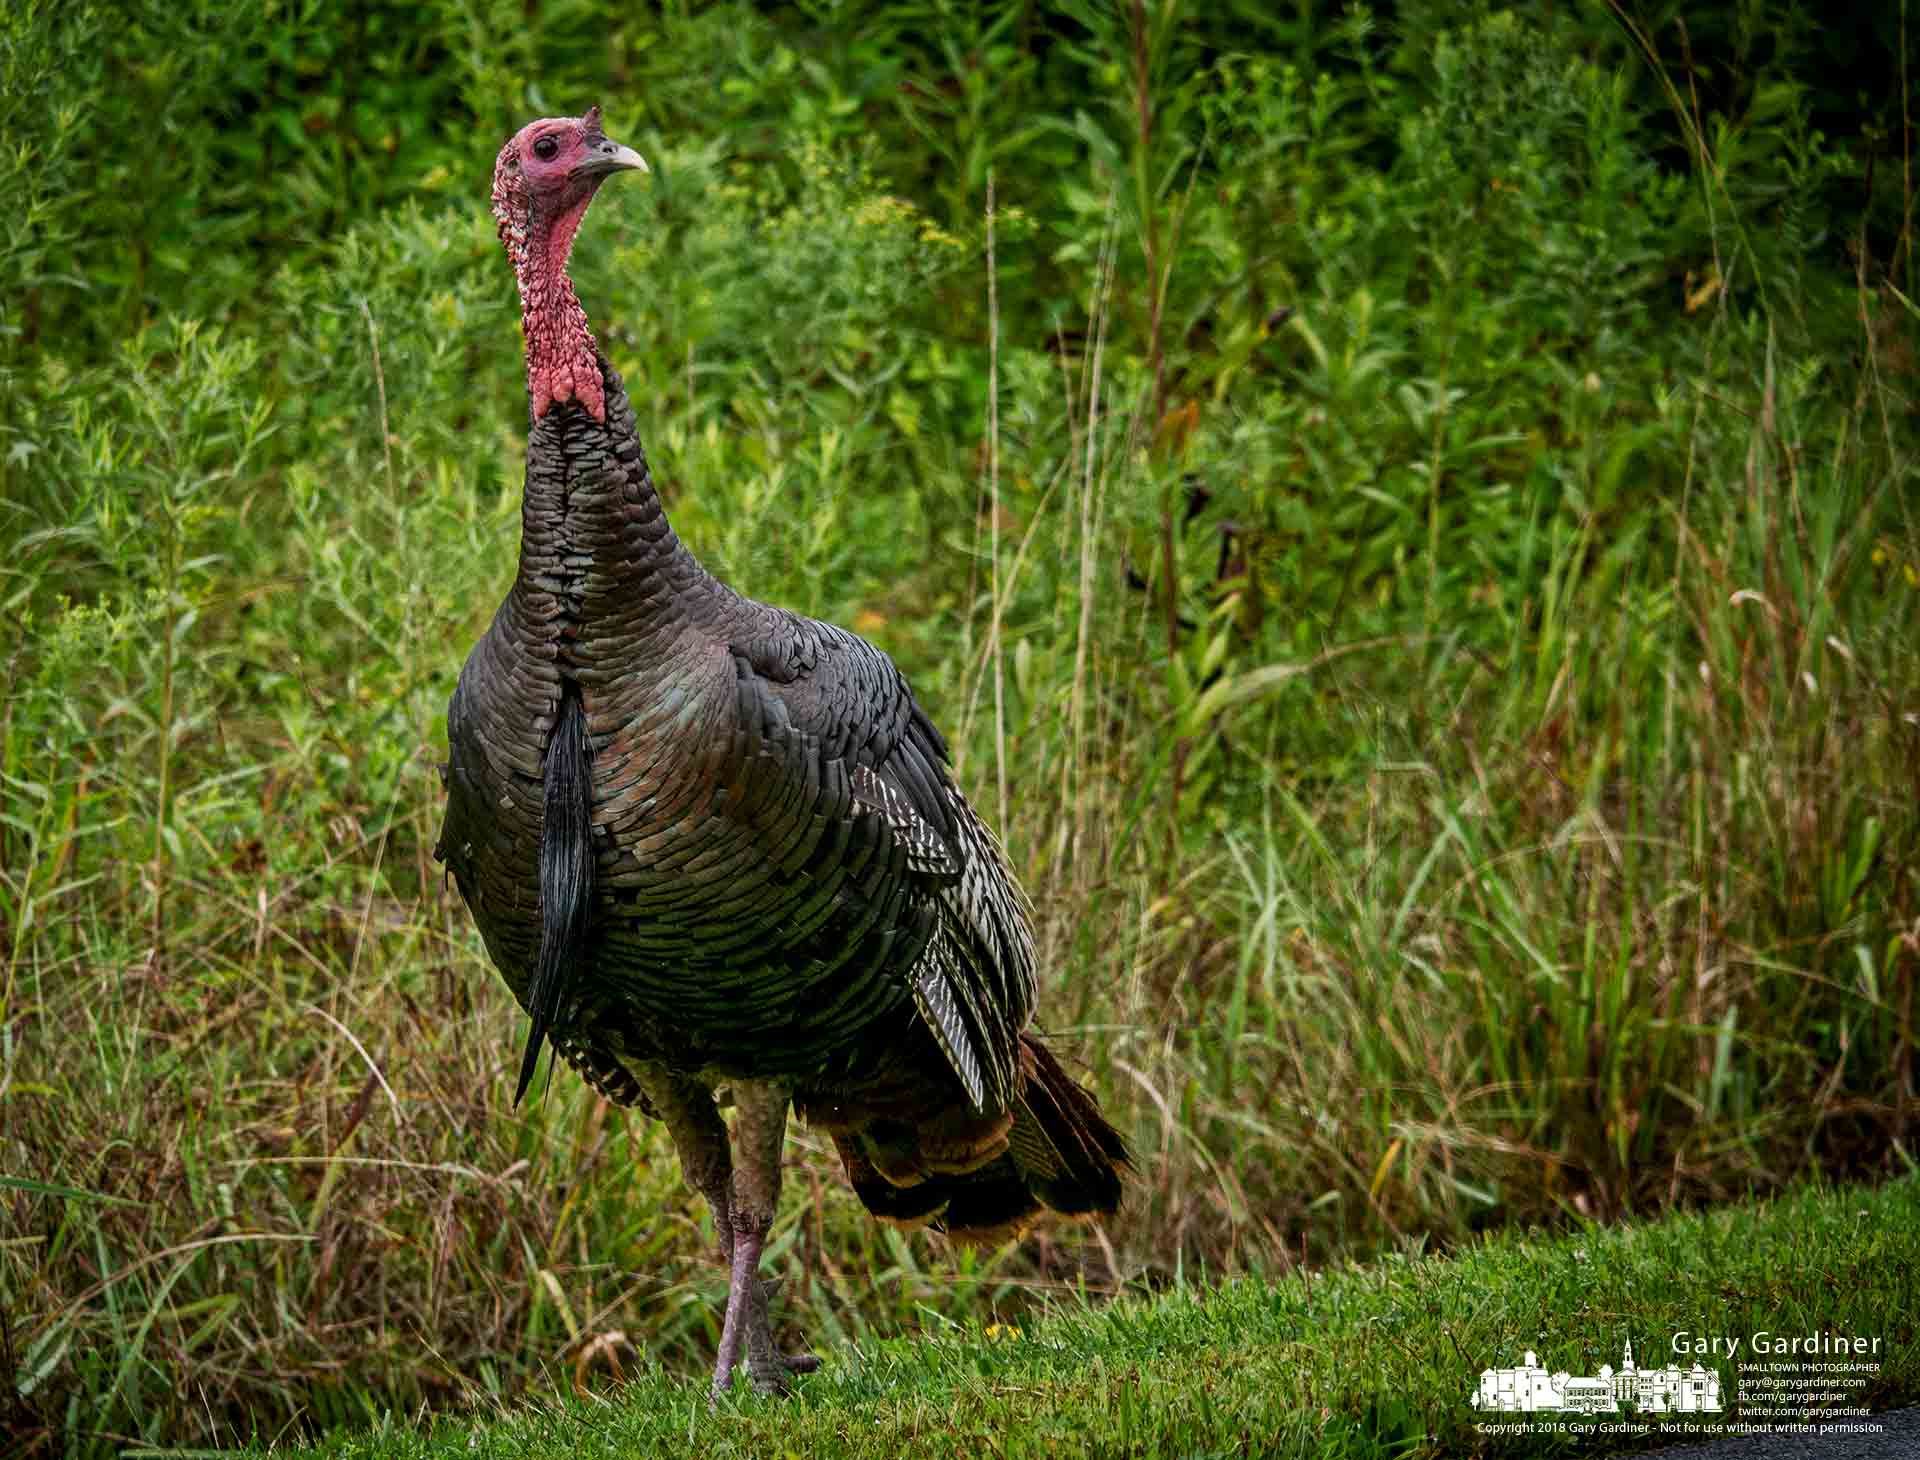 A turkey in search of food and companionship walks along the edge of the roadway leading into Sharon Woods Metro Park. My Final Photo for Aug. 16, 2018.